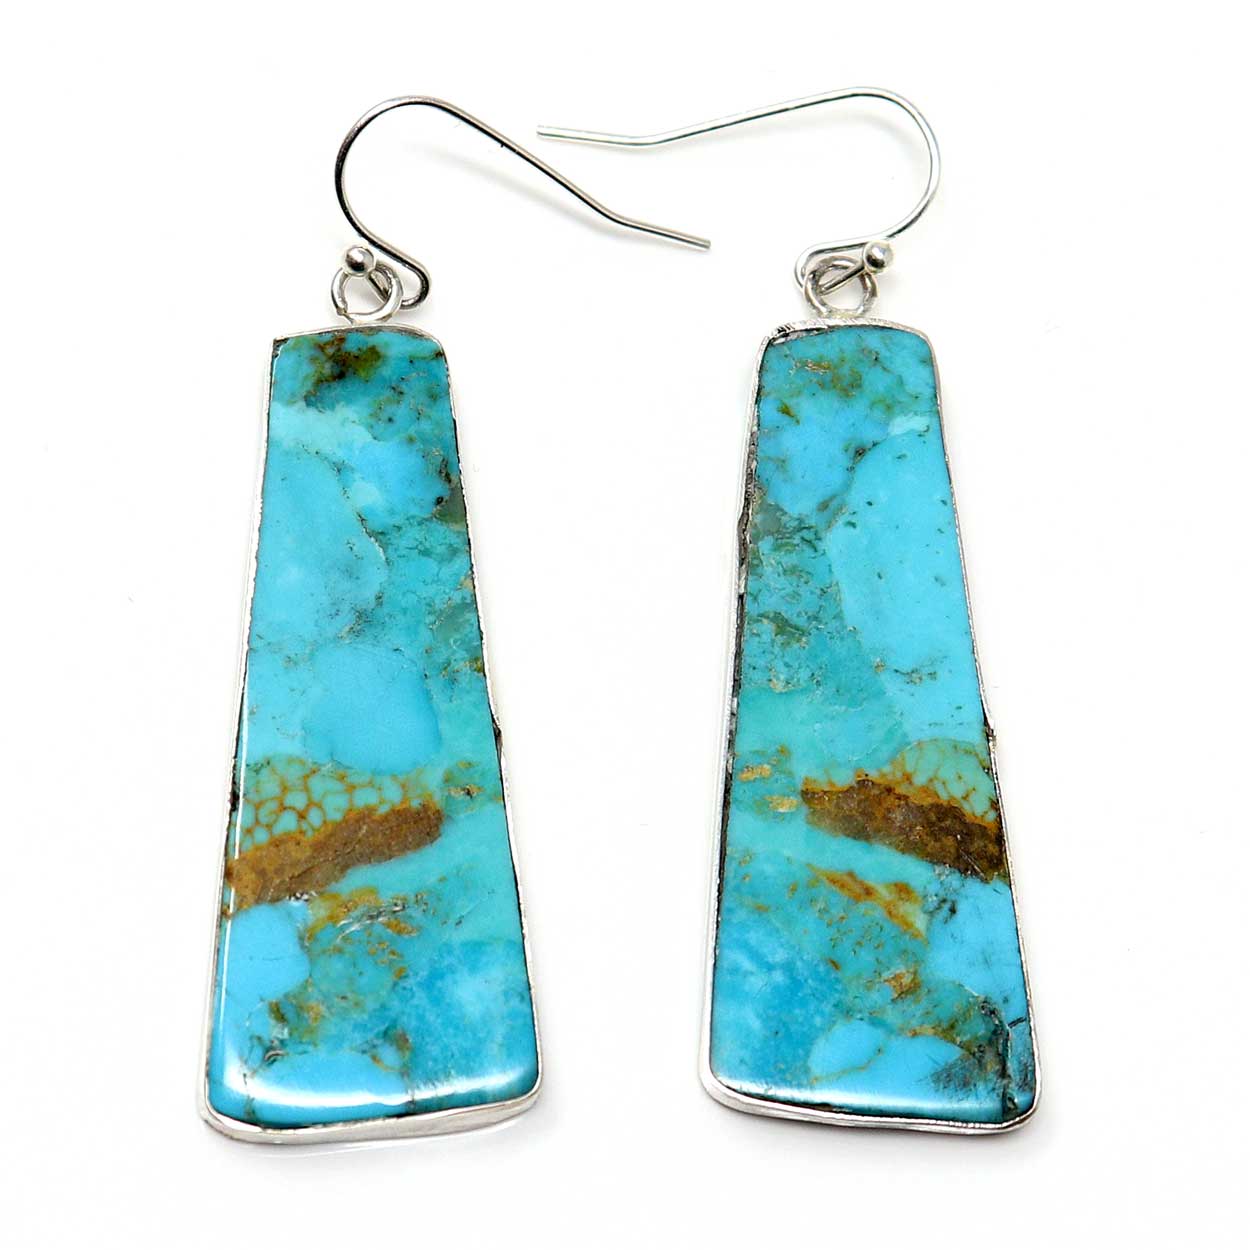 Turquoise Trapezoid Drop Earrings by Tortalita